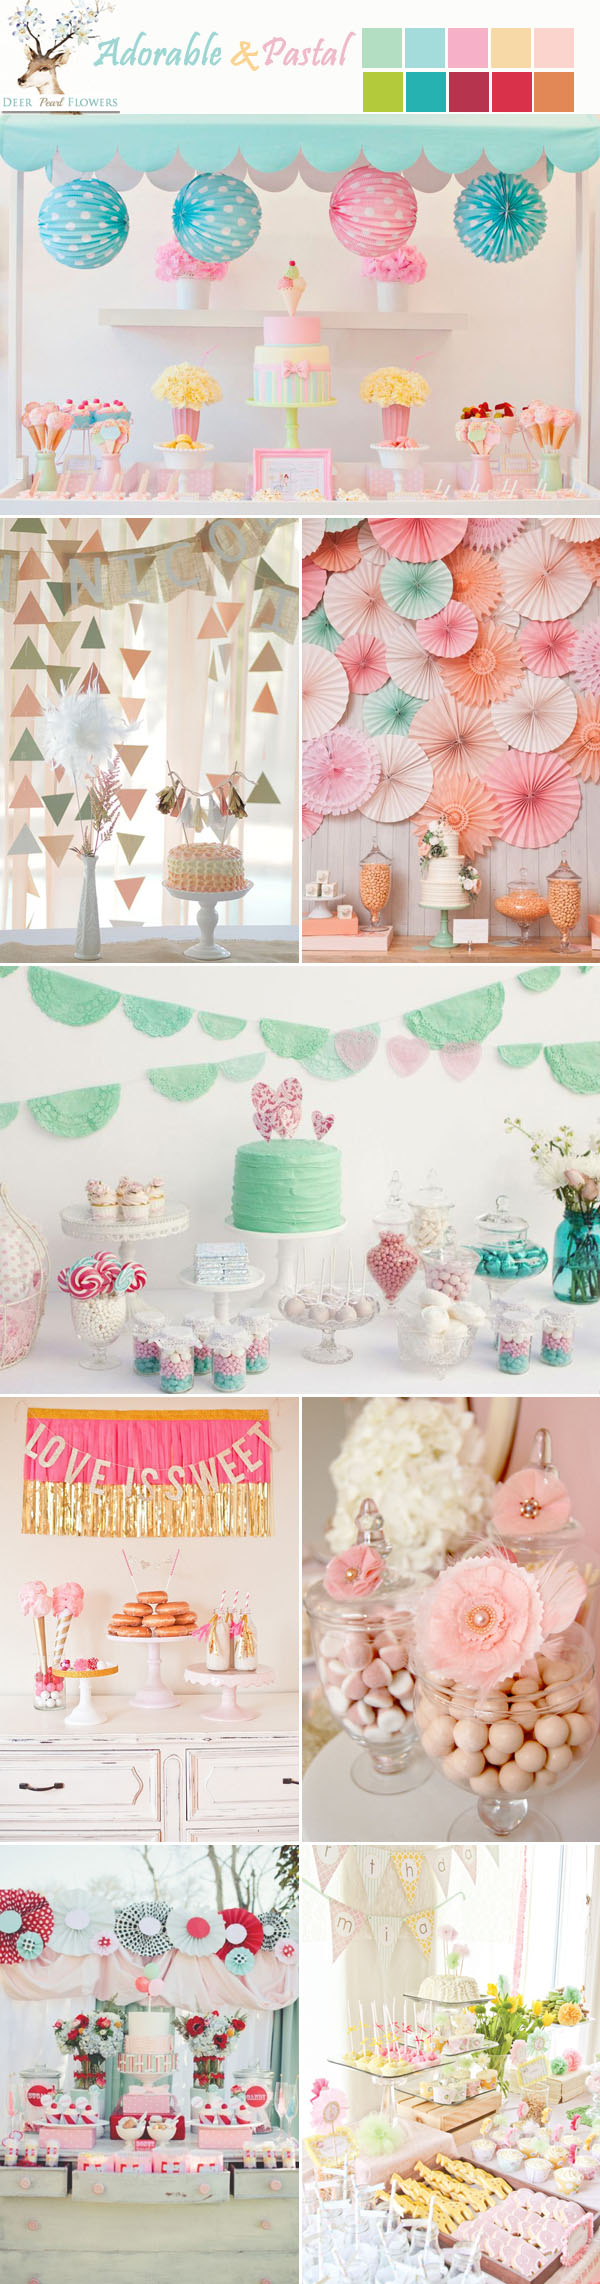 adorable pastel lime pink blush peach baby blue red wedding dessert table ideas